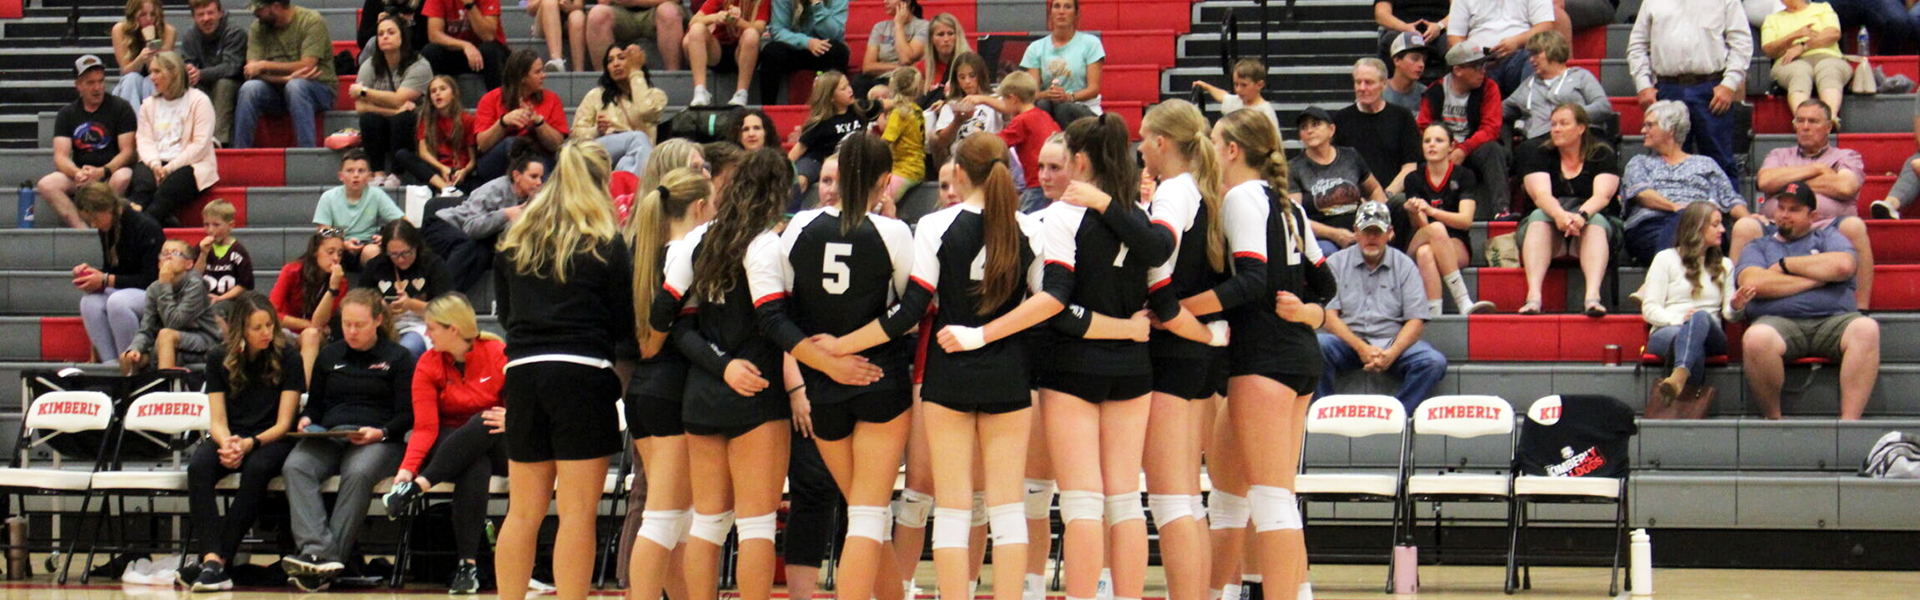 The KHS volleyball team meets before a match this season. | Photo by Publications staff